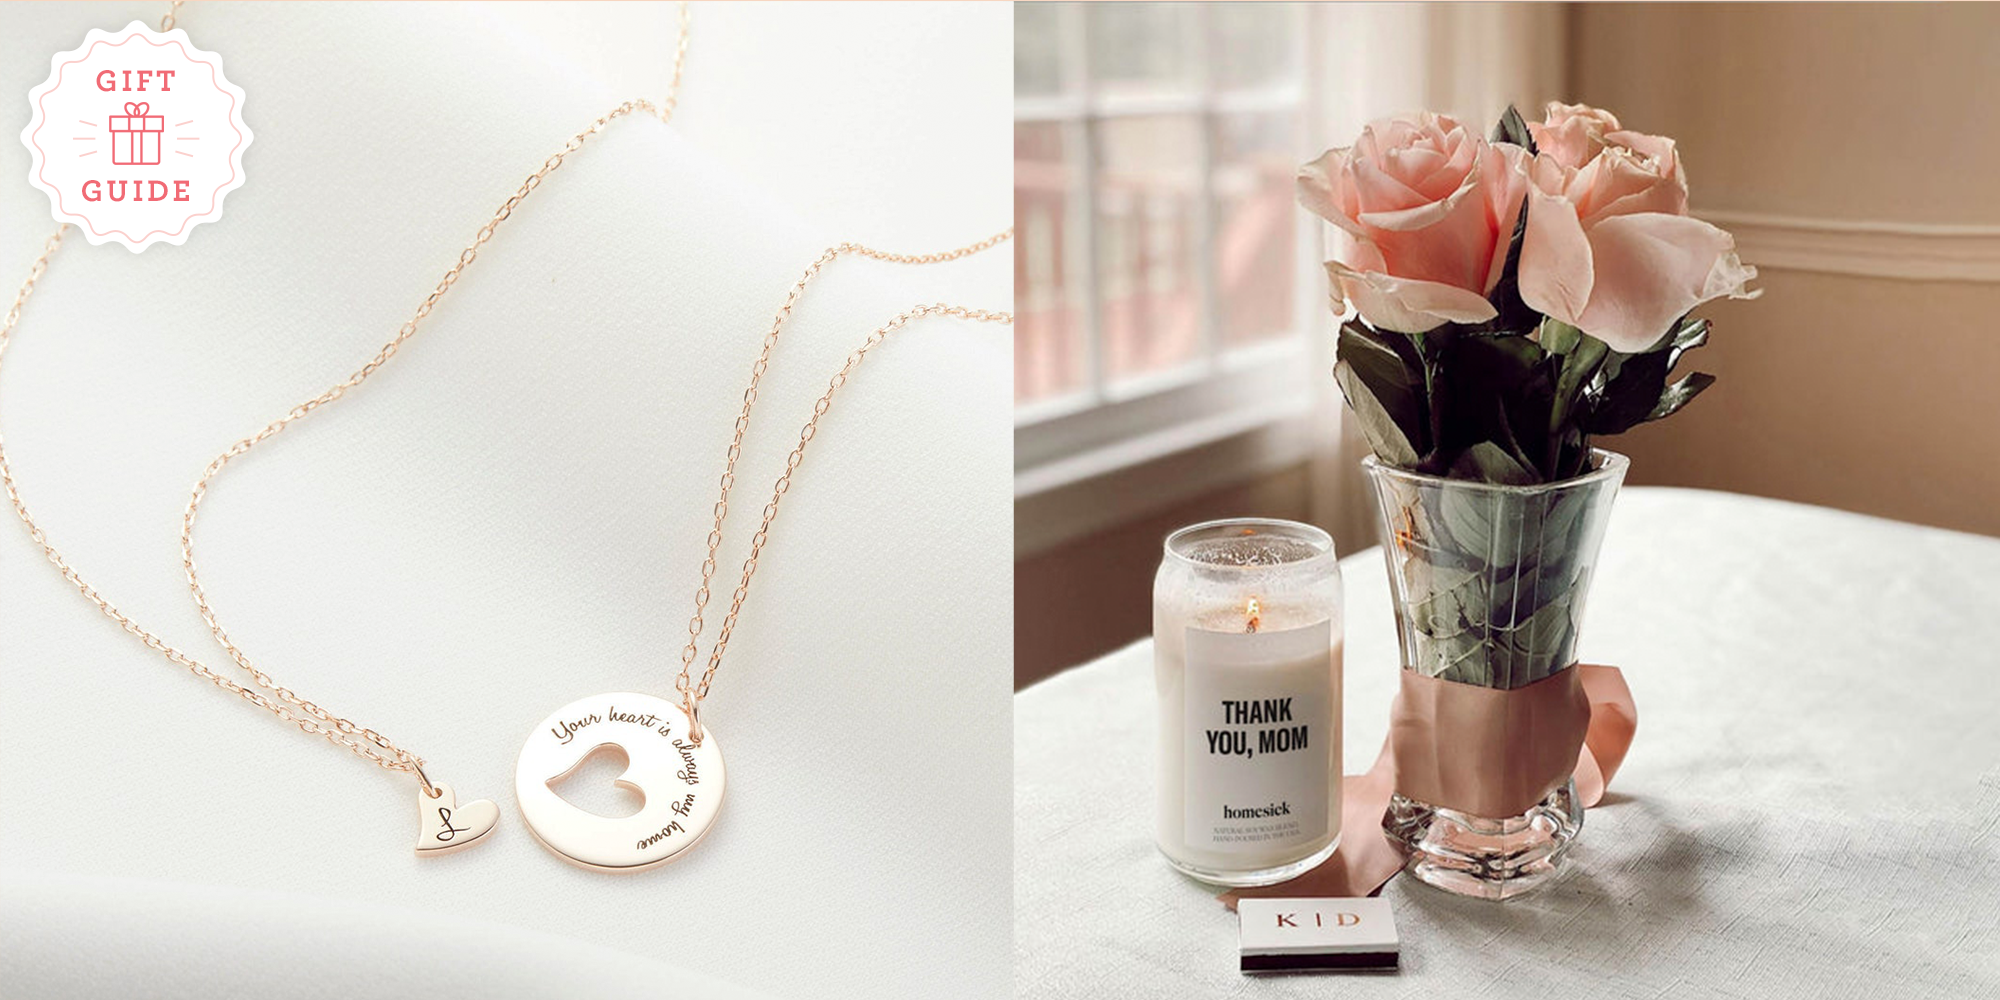 MOTHERS DAY DEALS Rose Gold & Silver Heart Locket Necklace Gifts For Her Mum Mom 